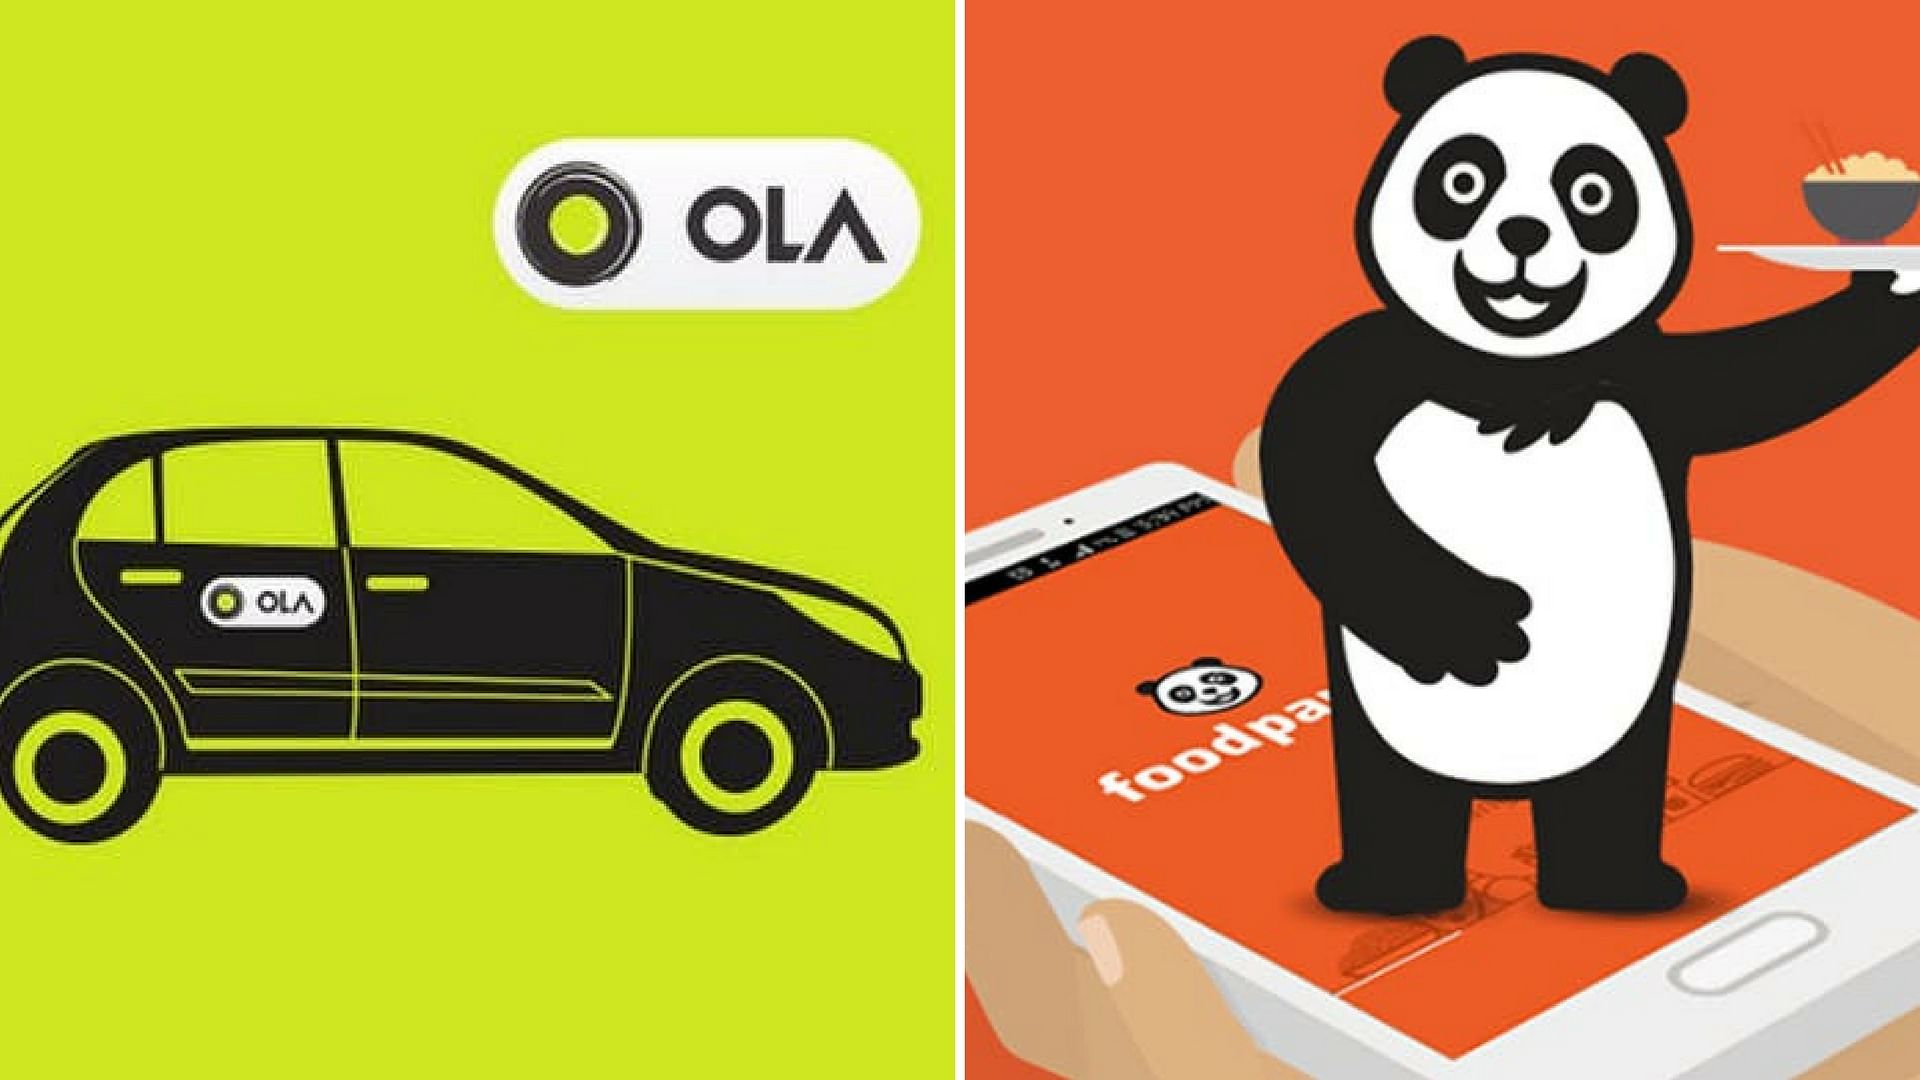 Ola will acquire Foodpanda’s India unit which has over 15,000 restaurants across 100 Indian cities on its platform.